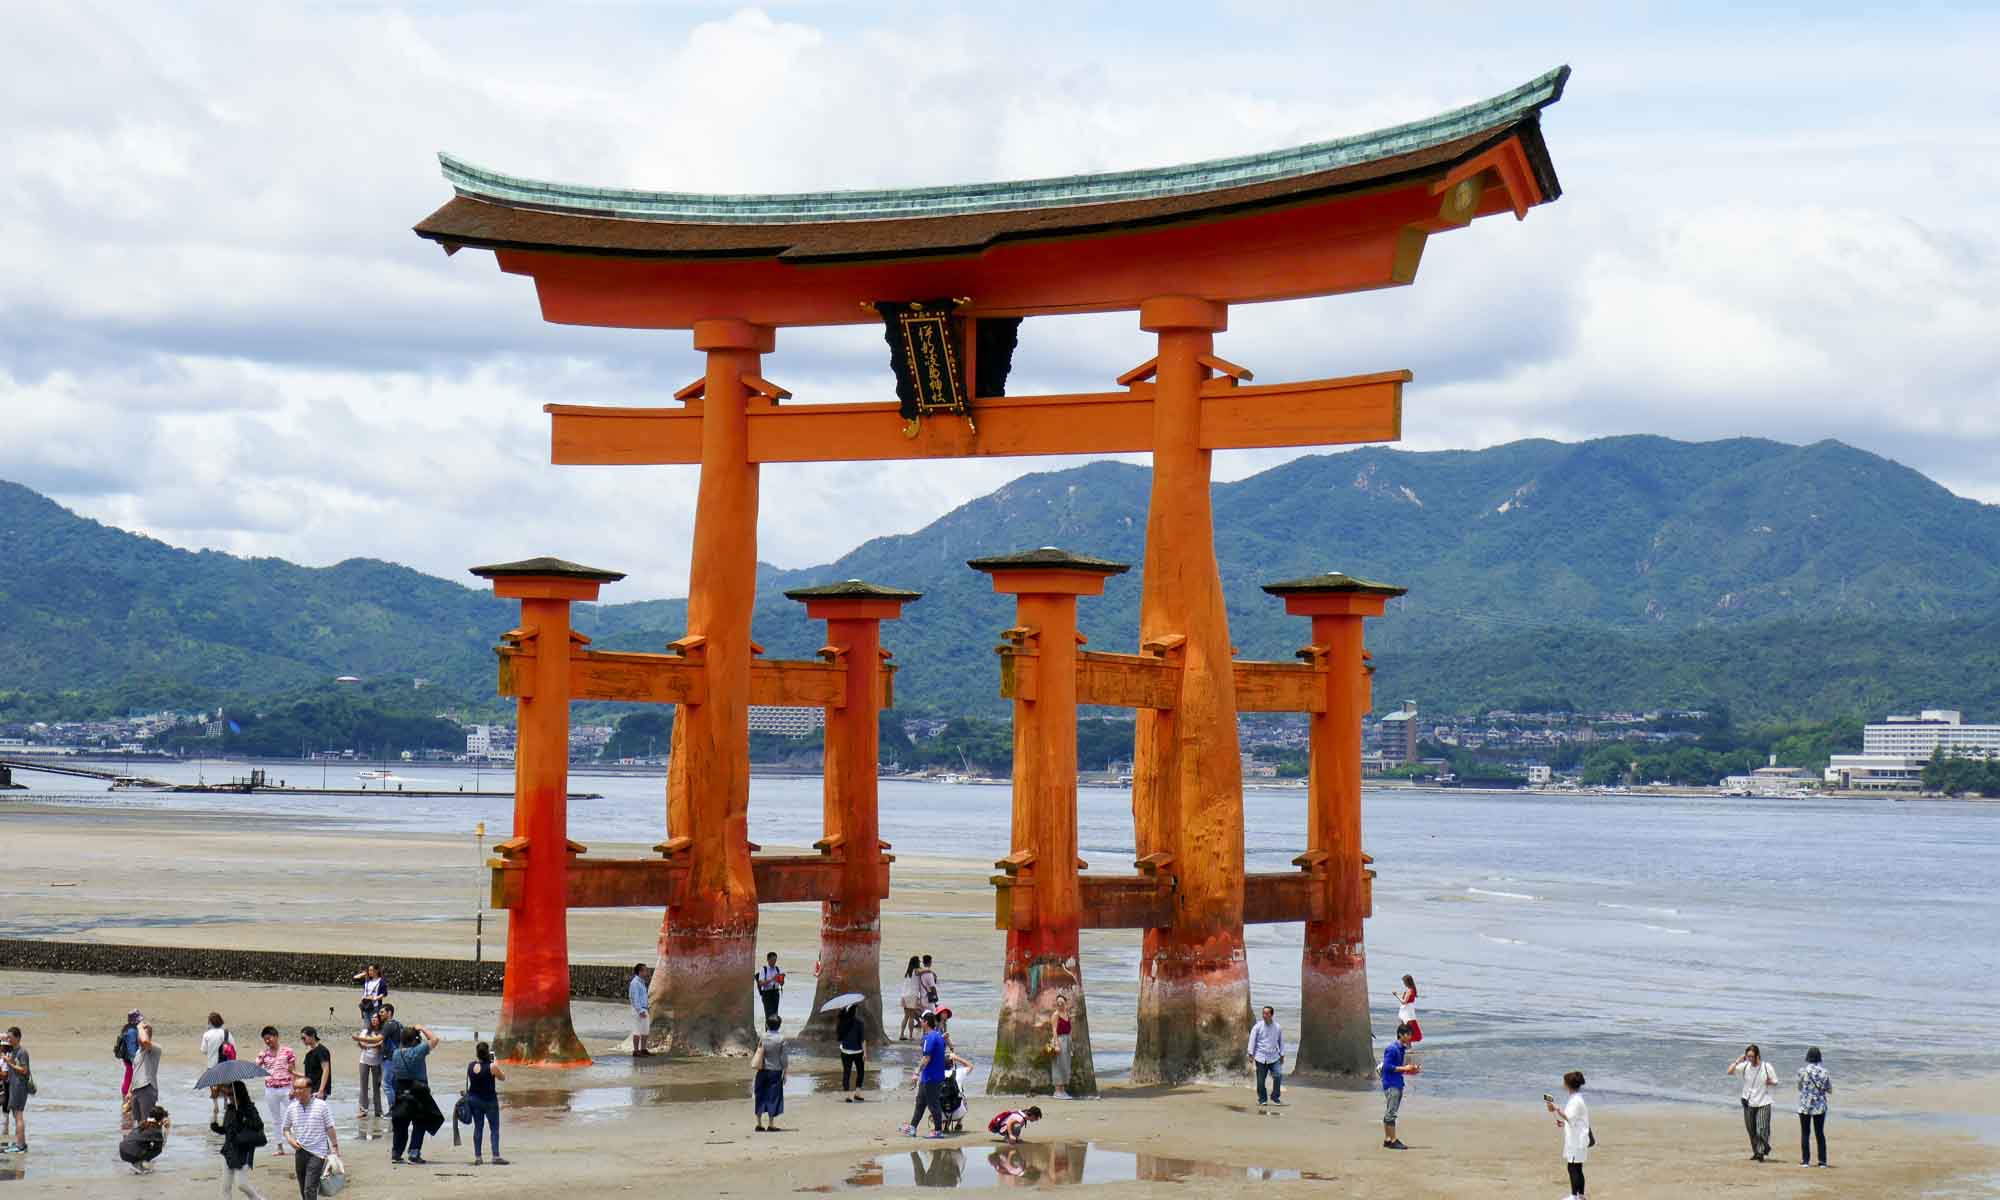 The torii gate at low tide